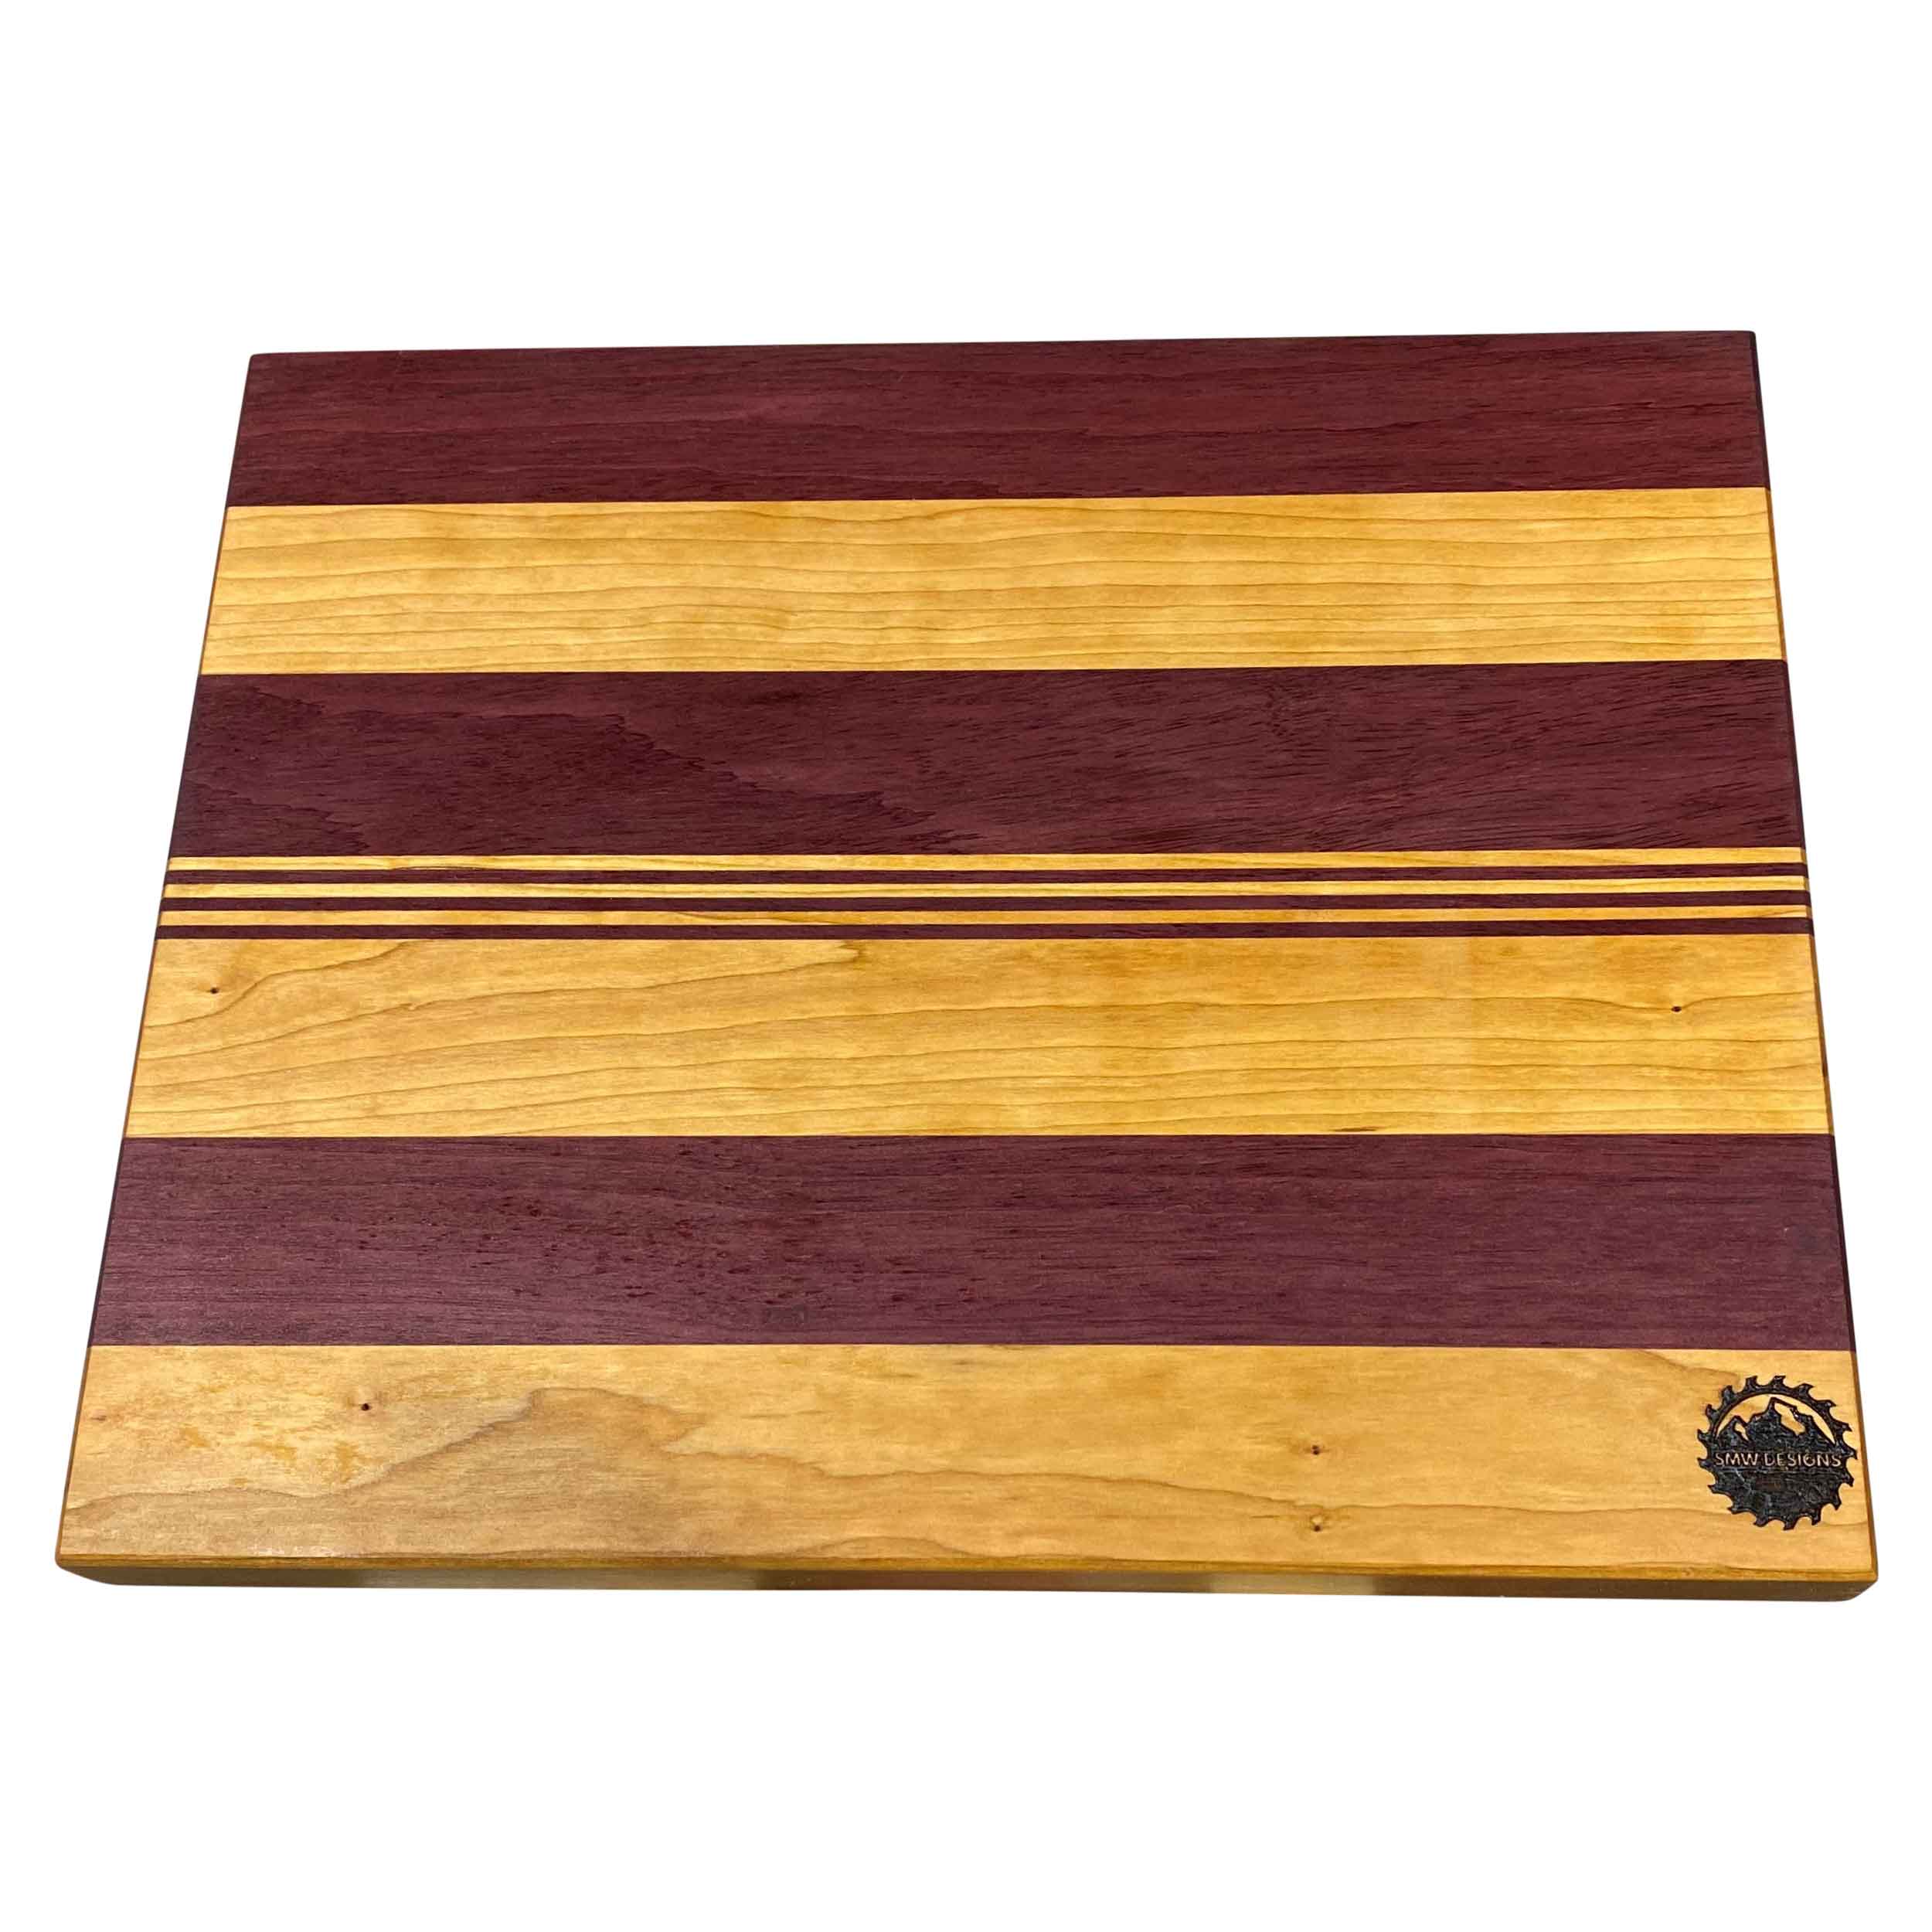 Montana Made Cutting Board in Purpleheart and Cherry